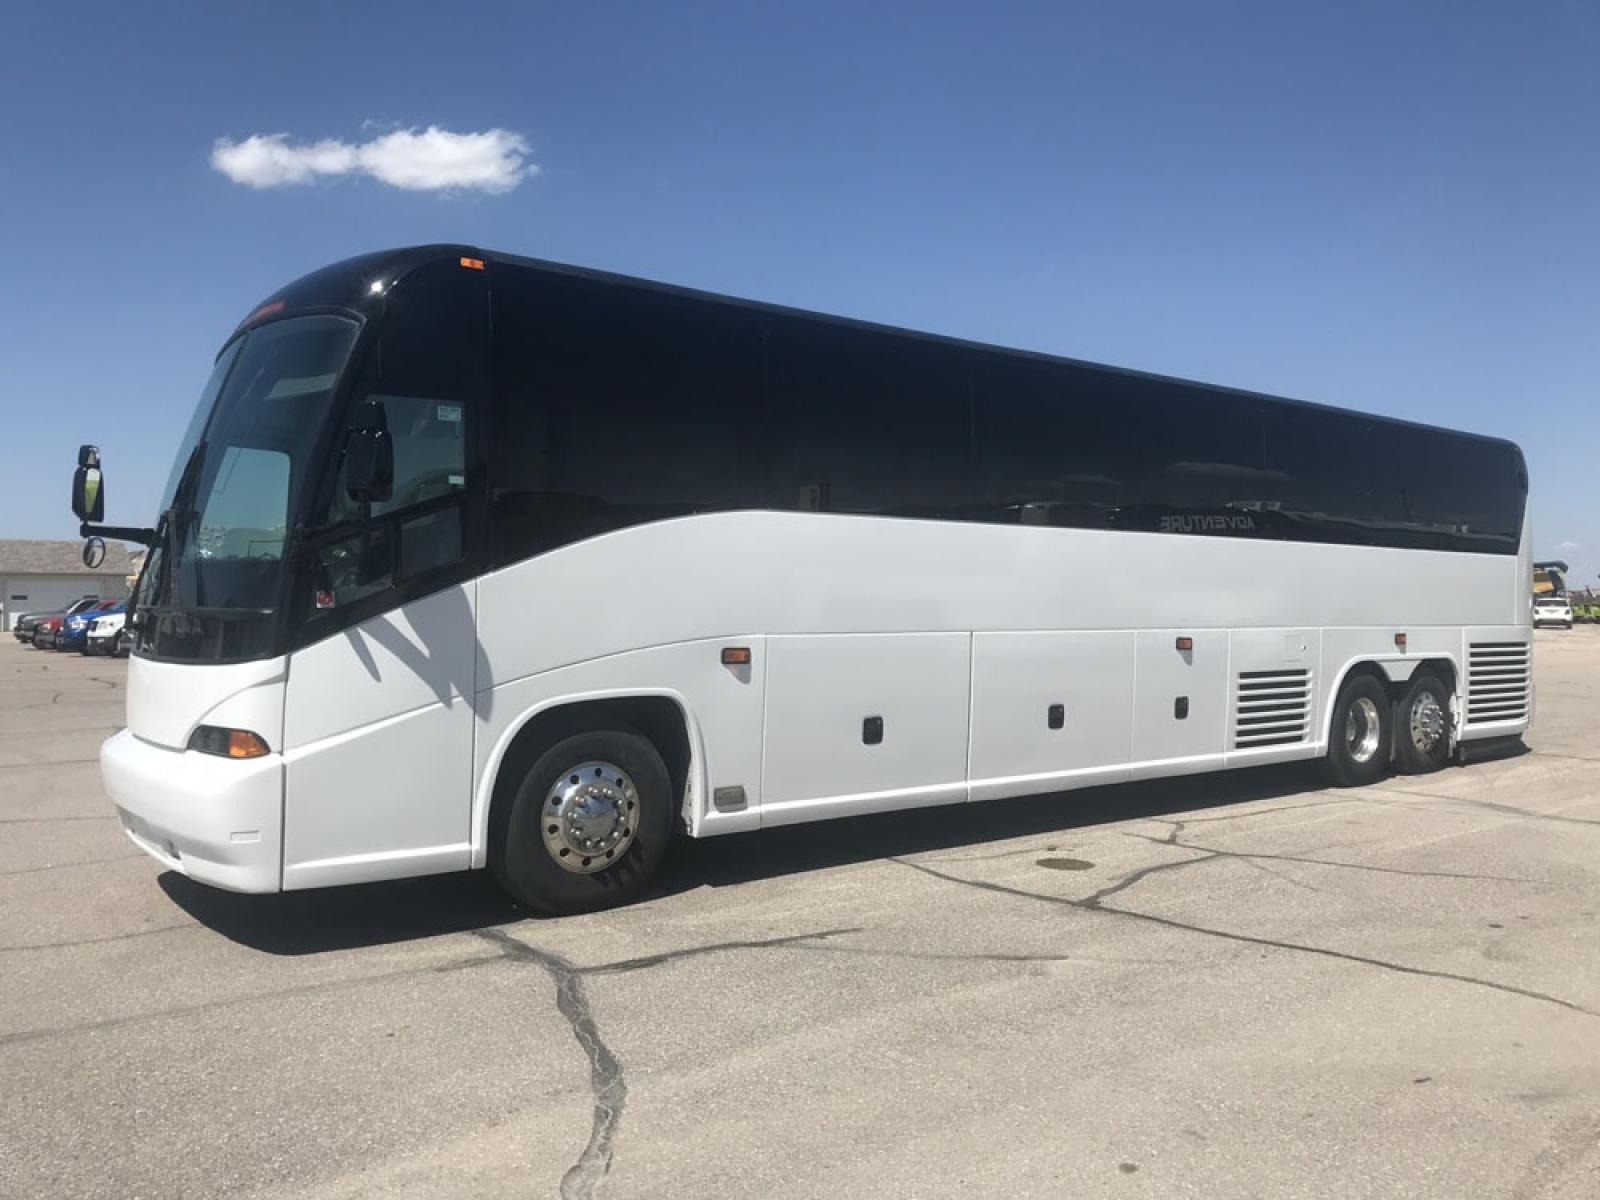 2008 White MCI J4500 with an Cummins ISM engine, ZF AUTO transmission, 0.000000, 0.000000 - 2008 MCI J4500 - Cummins ISM Diesel Engine - ZF Auto Trans. - 45' -- 56 Passengers -- Seat Belts - Flat Screens and DVD - Aluminum Wheels - Enclosed parcel racks – Restroom - Photo #1